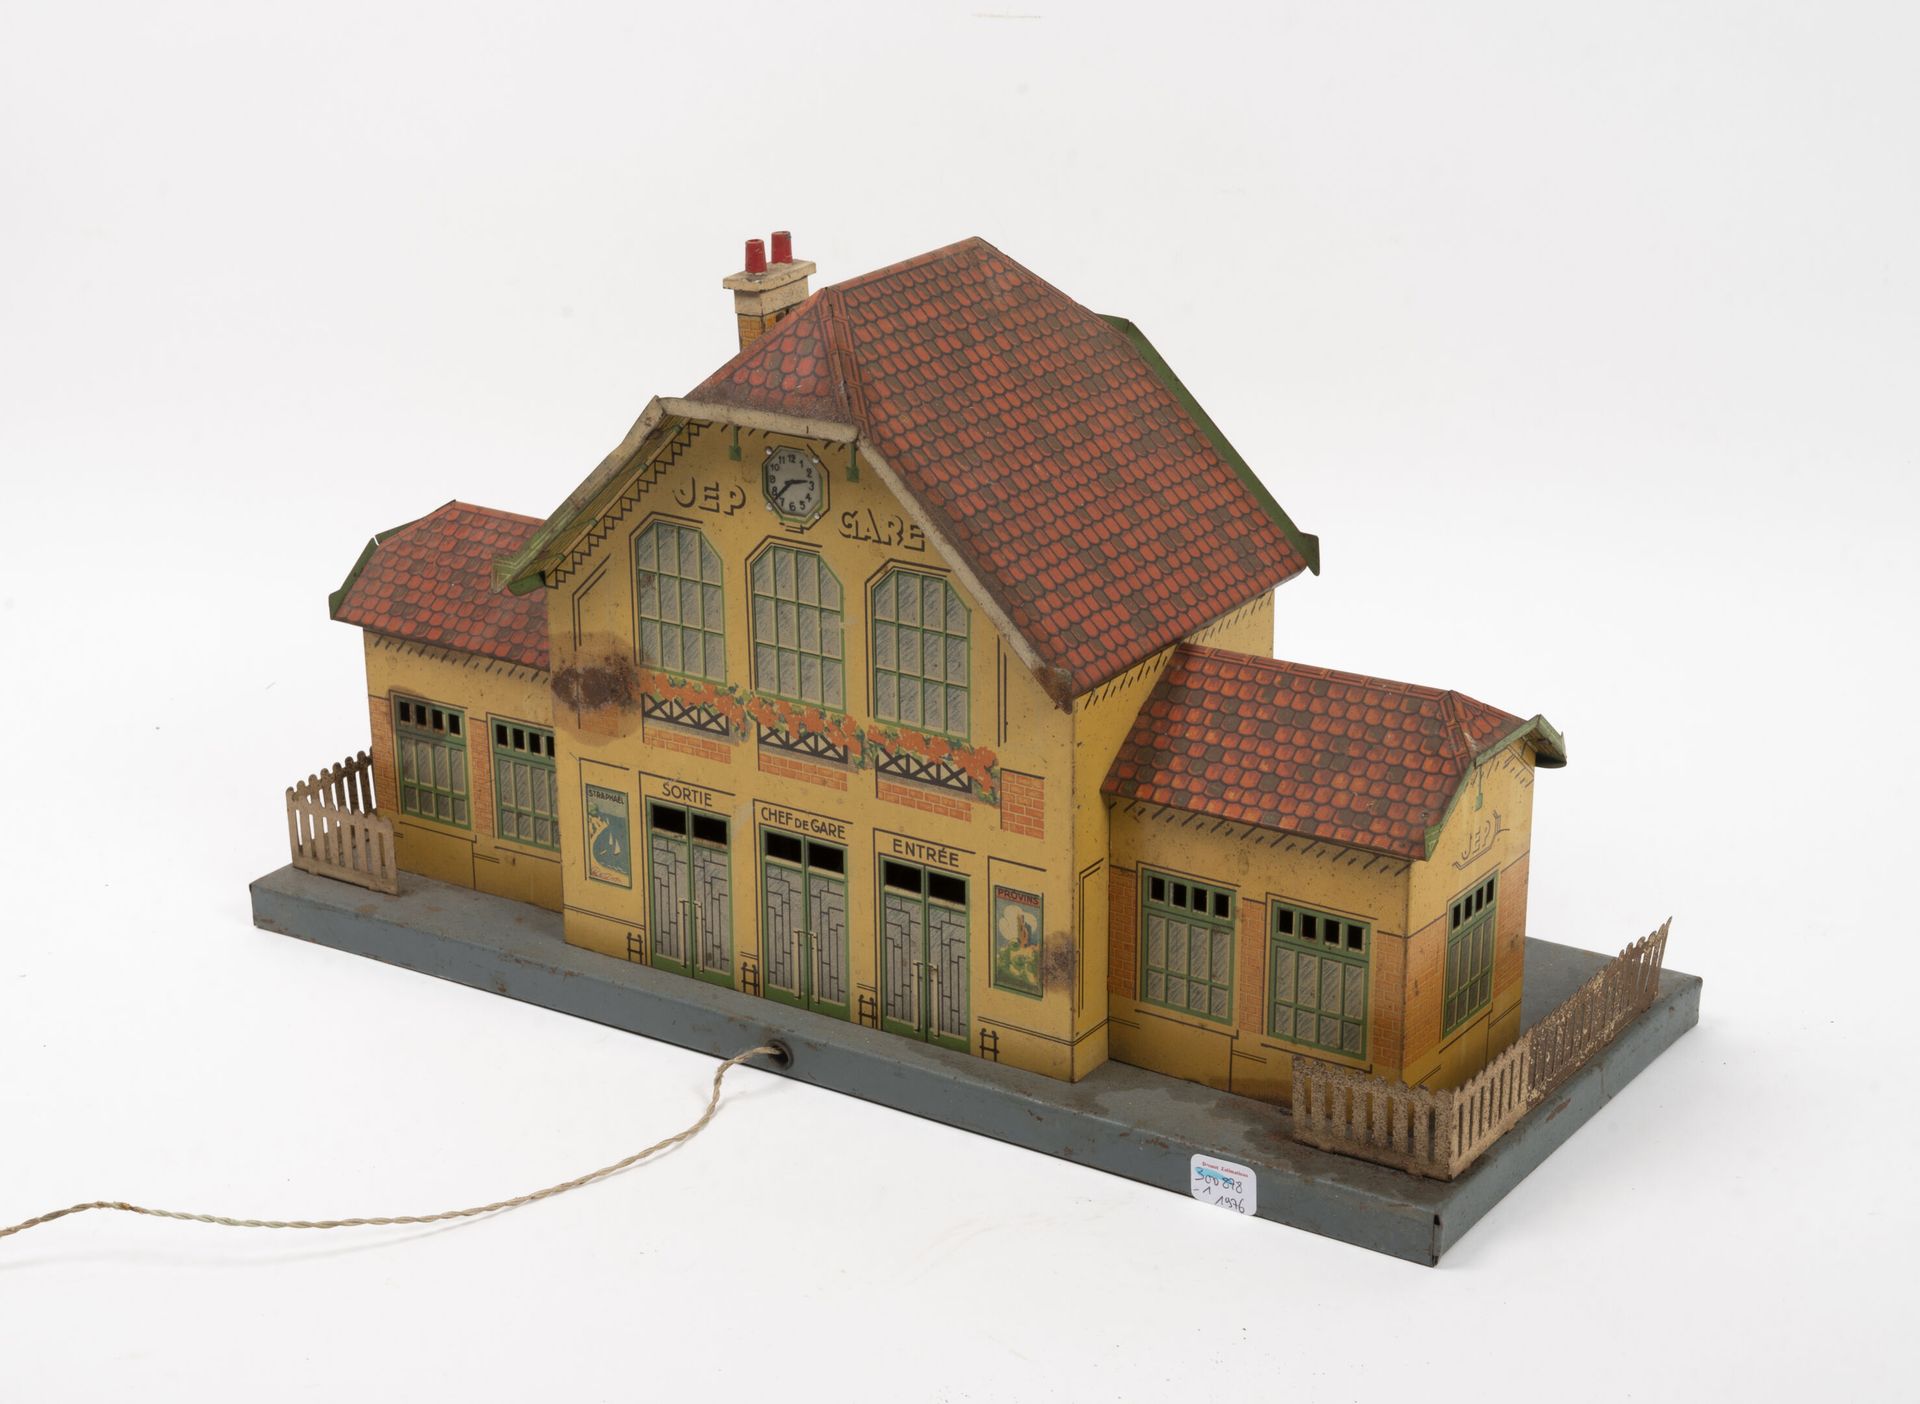 JEP Station big model.

In lithographed sheet metal.

Spread O.

25 x 46 cm.

Sc&hellip;